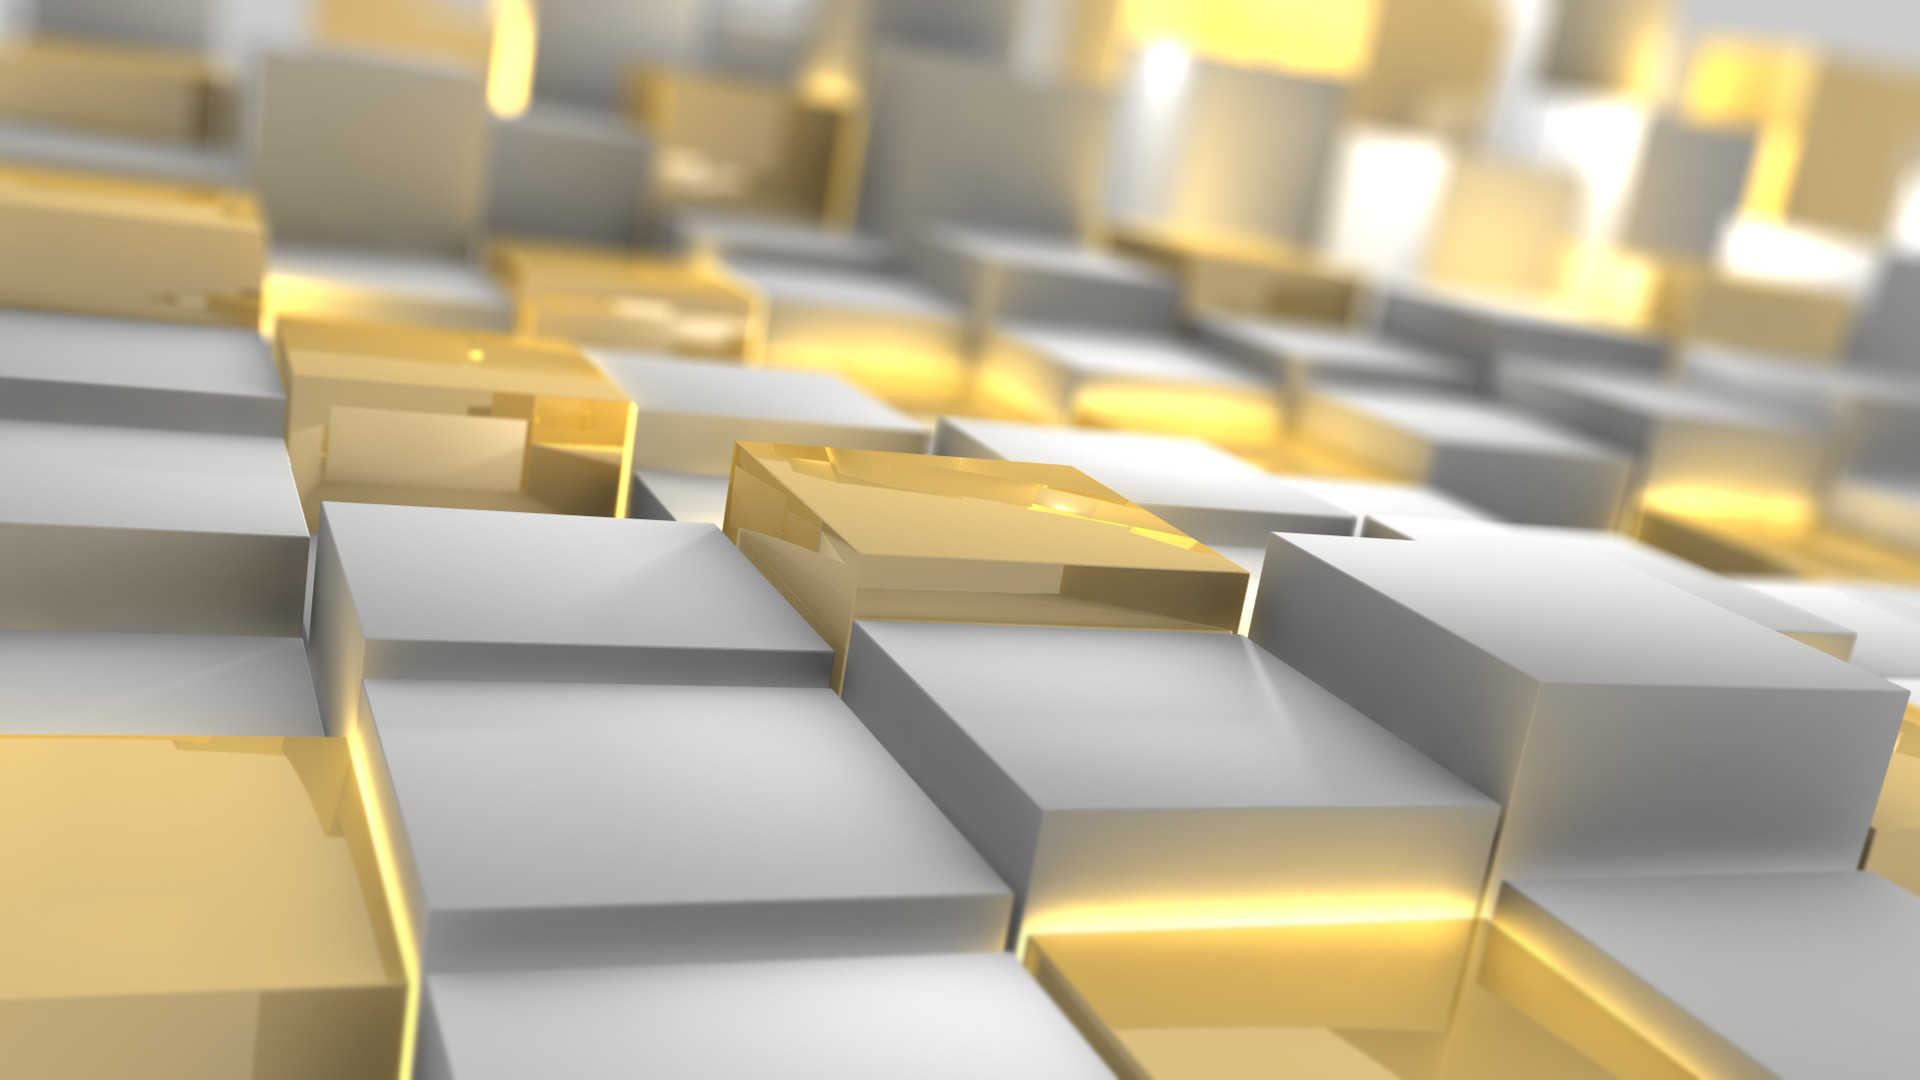 1920x1080 Extra Wallpapers - Gold and silver shiny cubes